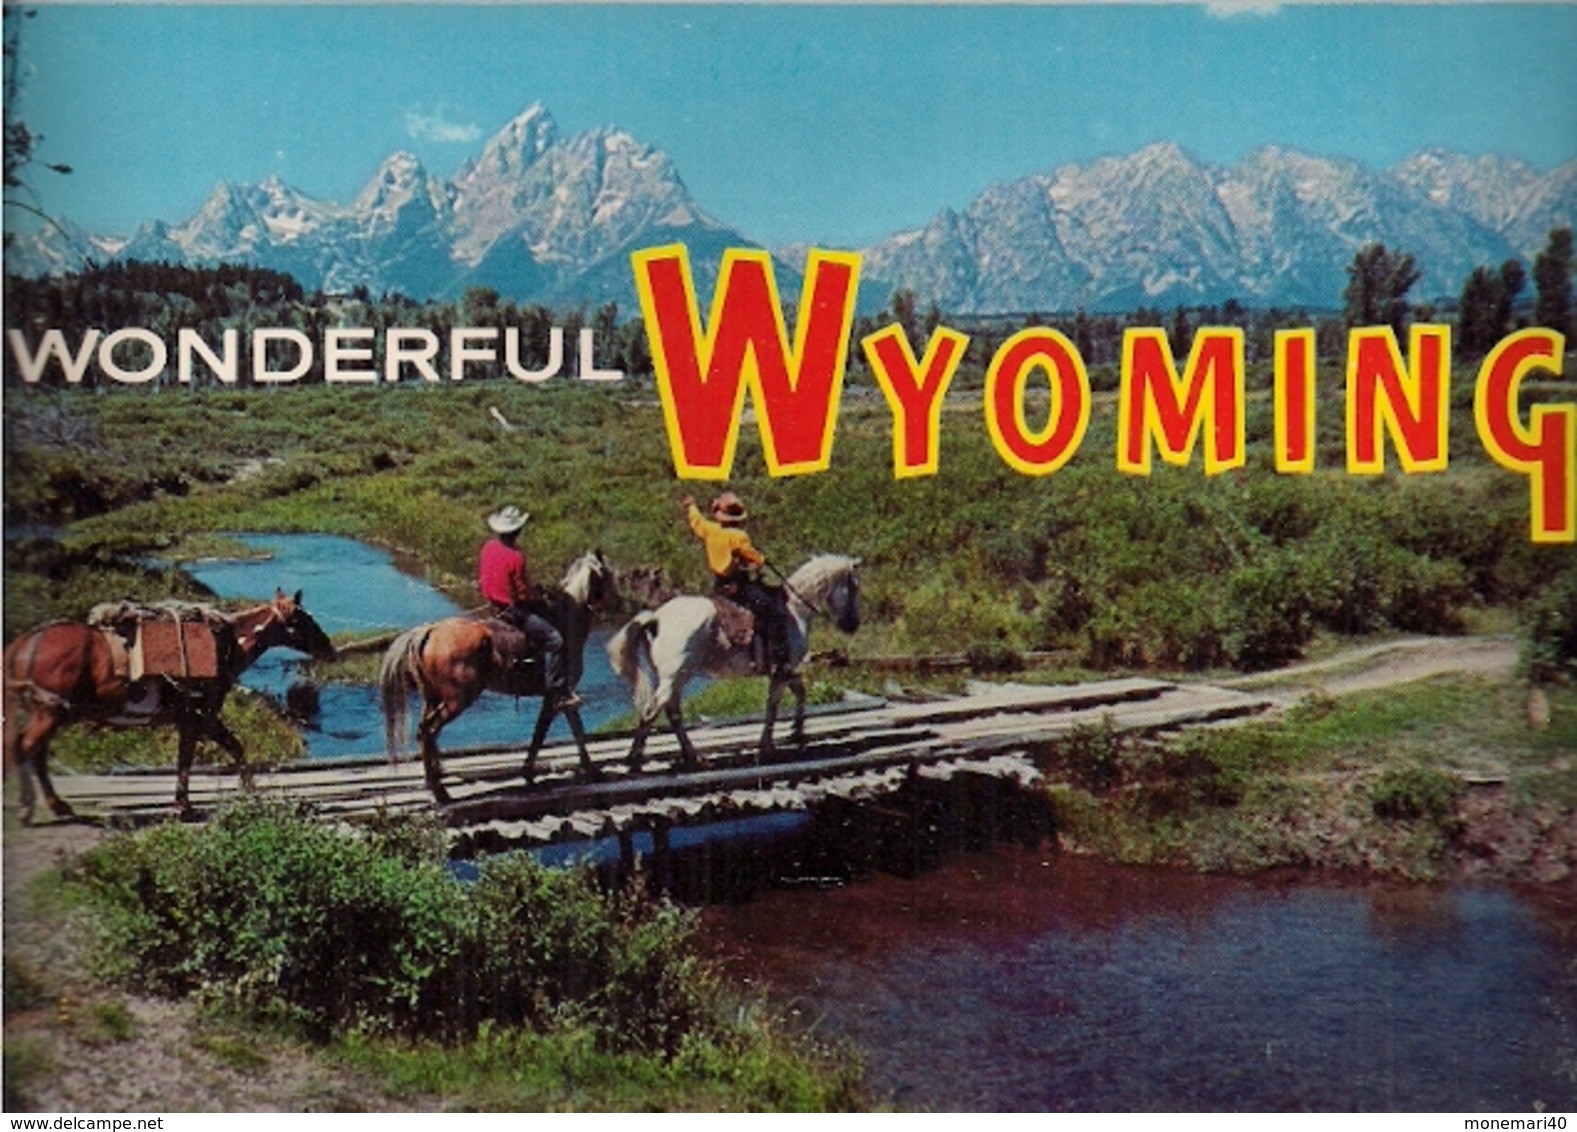 WYOMING (U.S.A.) - WONDERFUL - LAST OF THE 0LD WEST - 62 IMAGES IN LIVING COLOR. - Etats-Unis